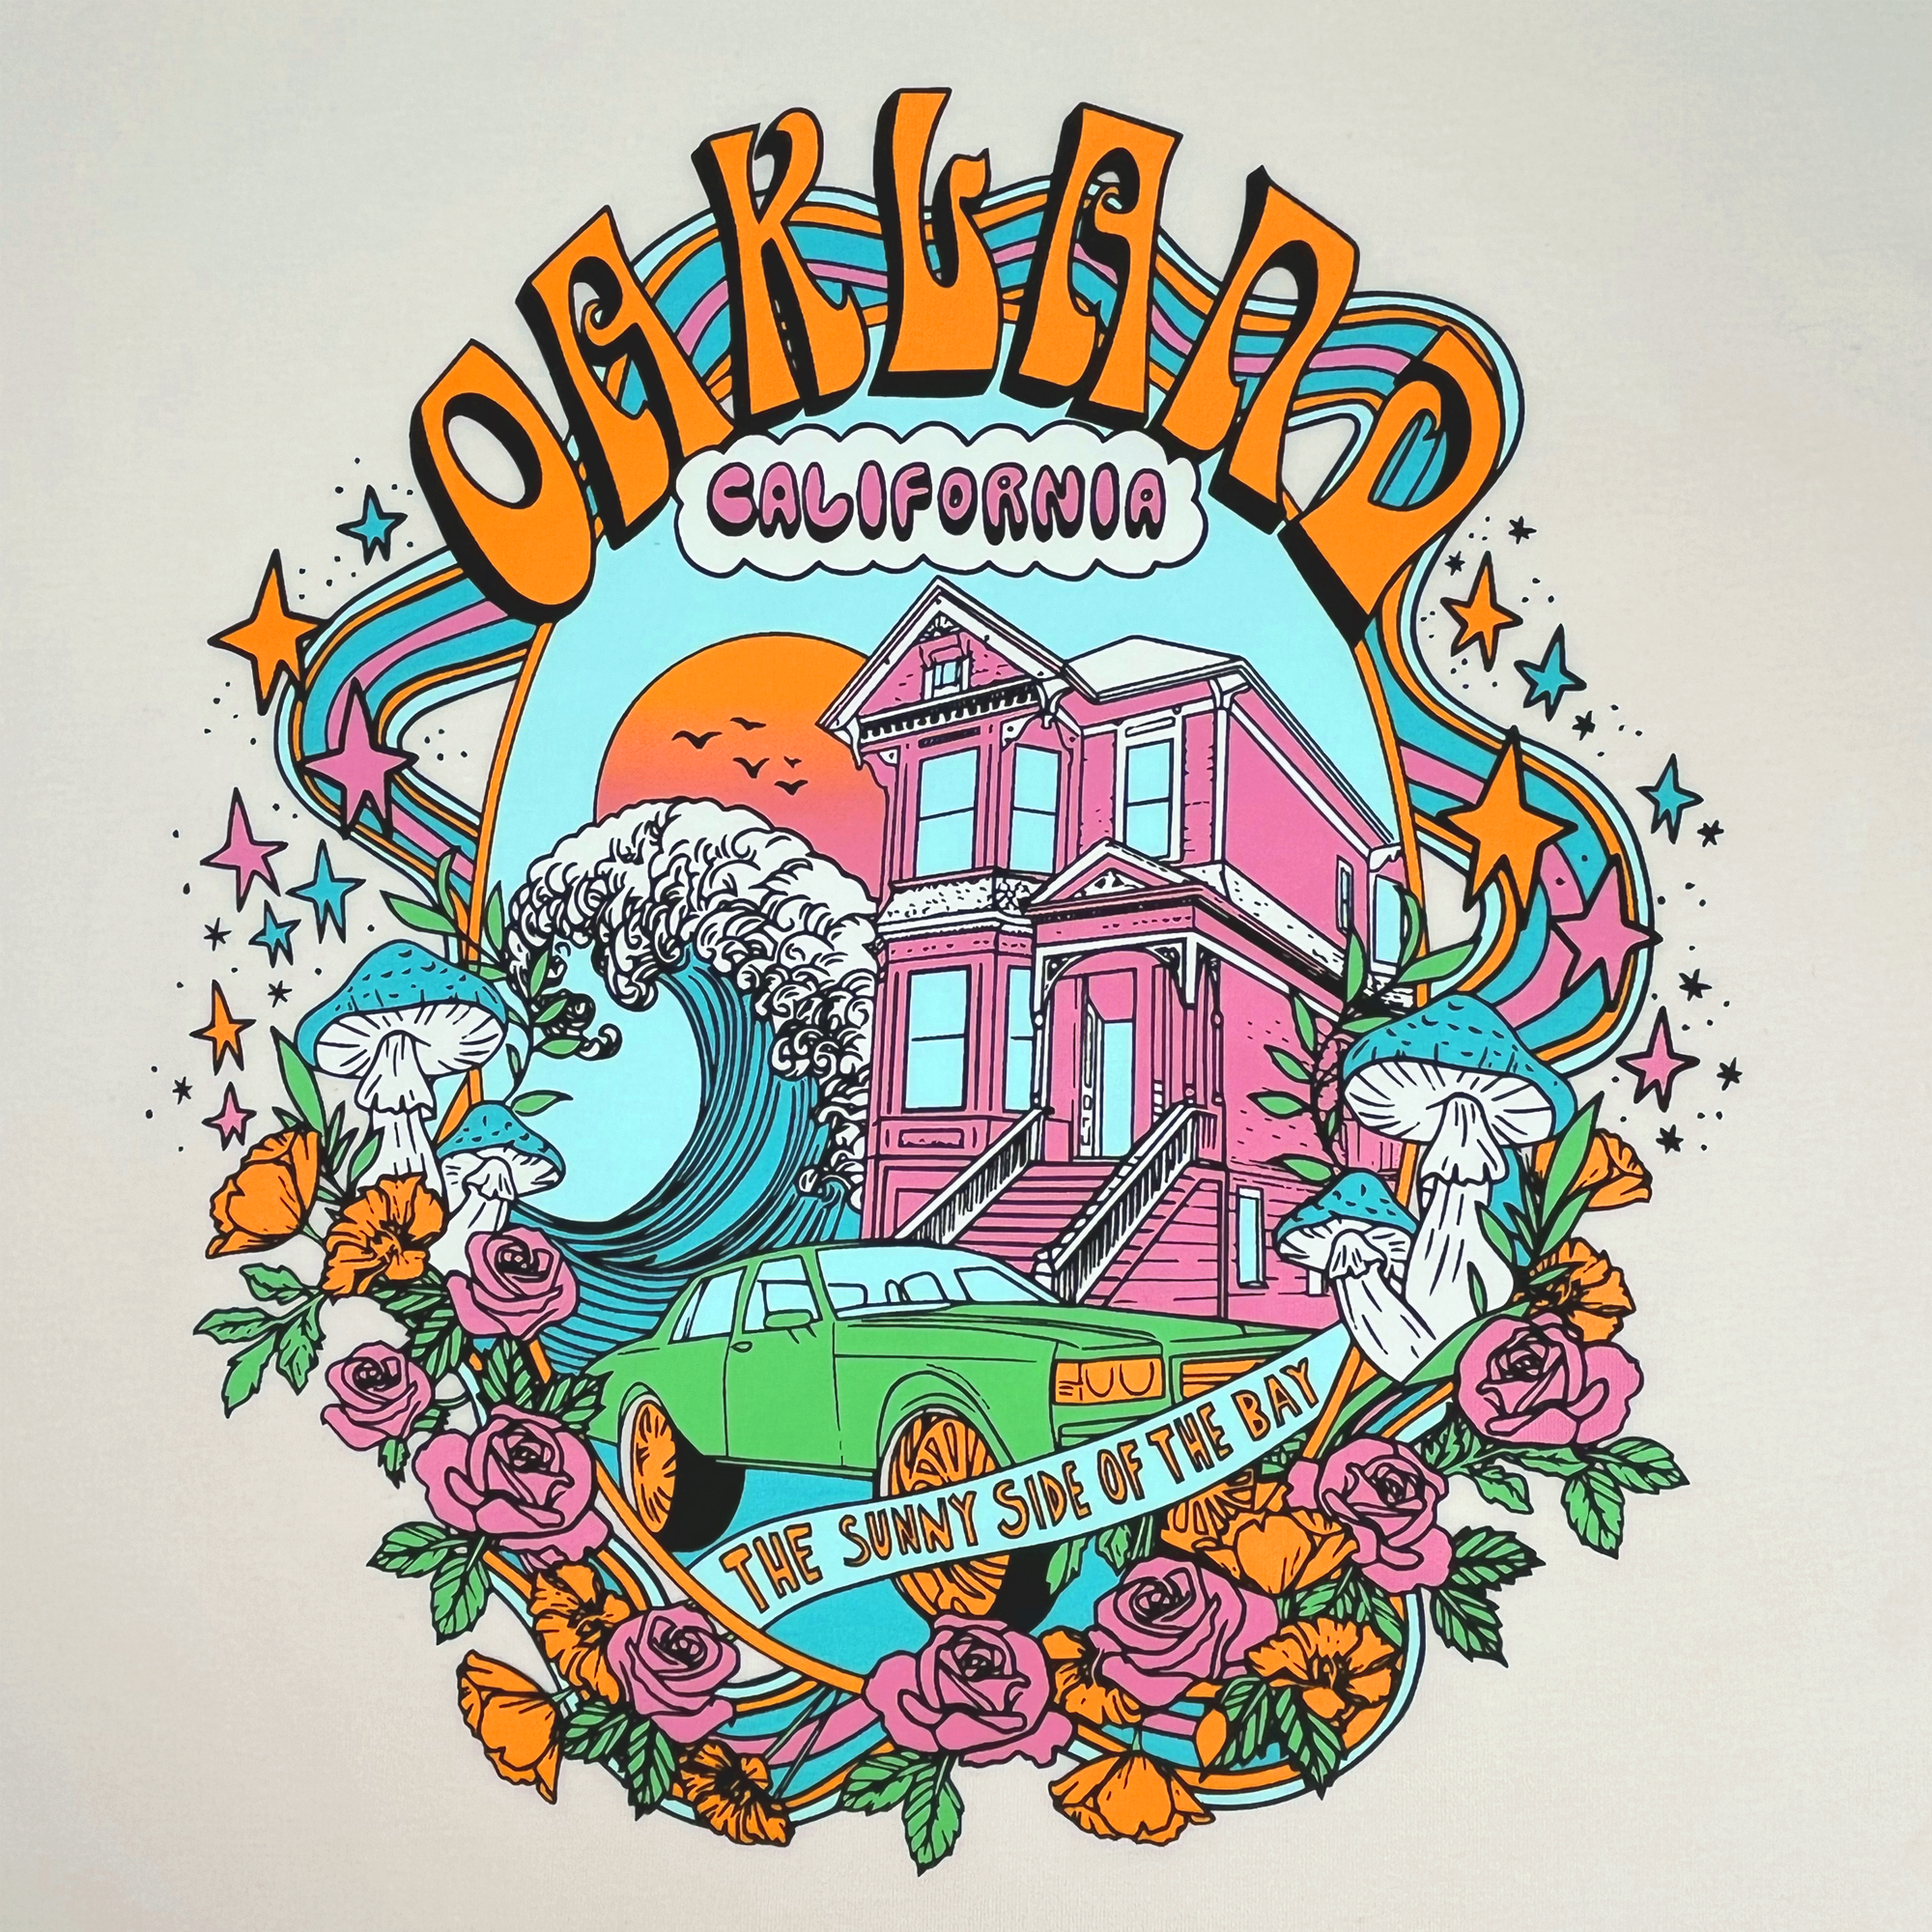 Detailed close-up of full-color dreamscape graphic with Oakland, California, Sunny Side of the Bay wordmark on a natural cotton-colored t-shirt.